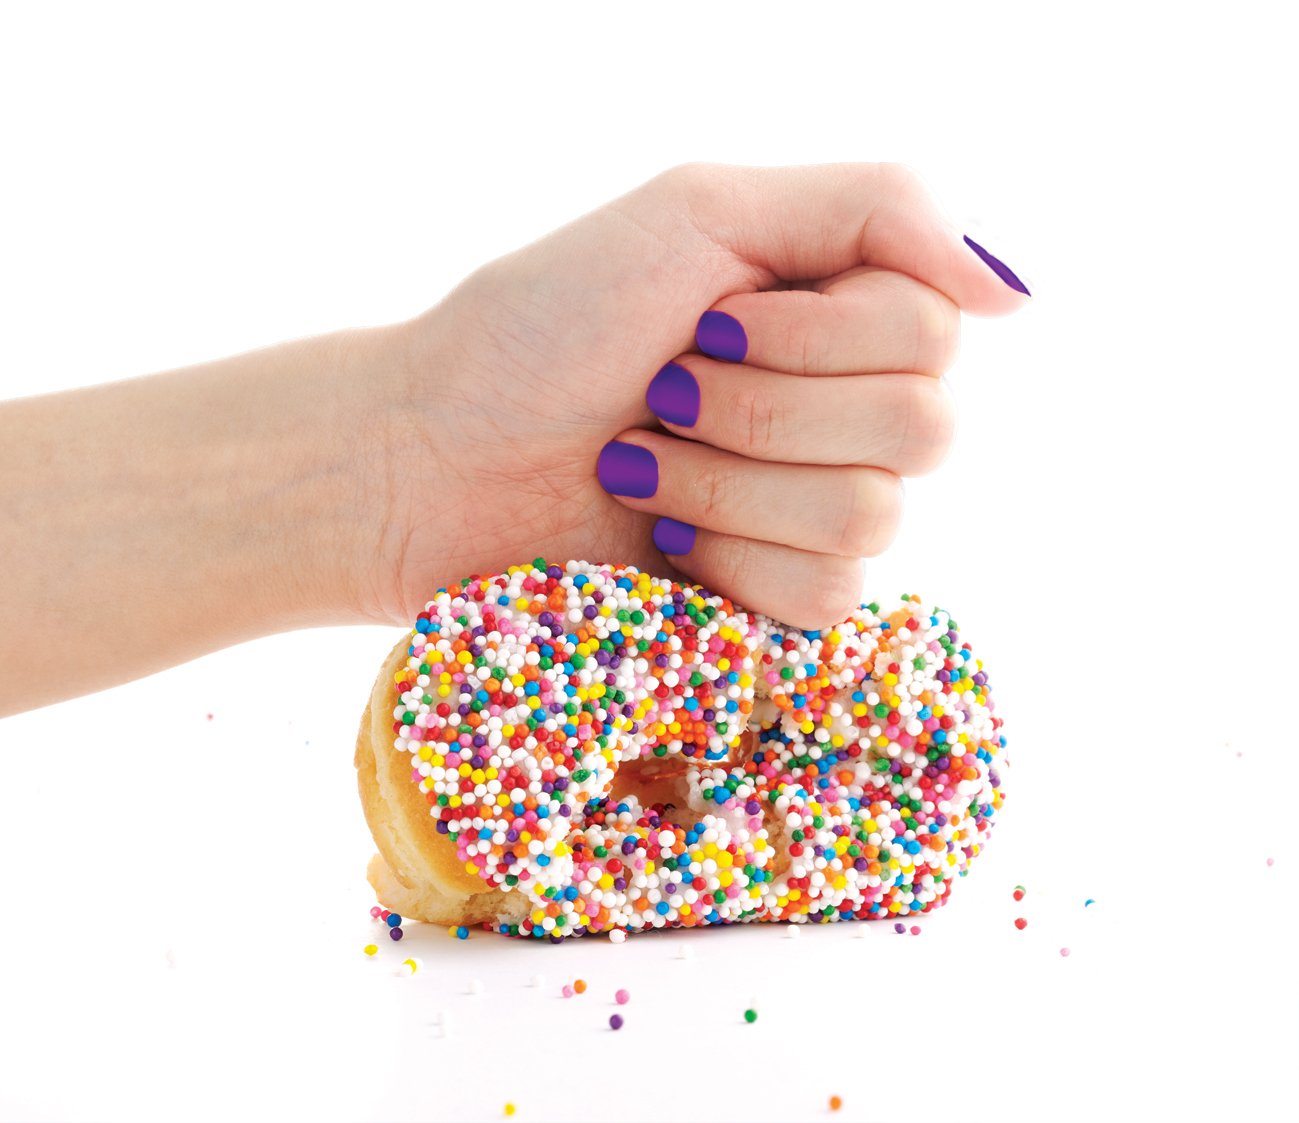 Fist squashing a donut with sprinkles